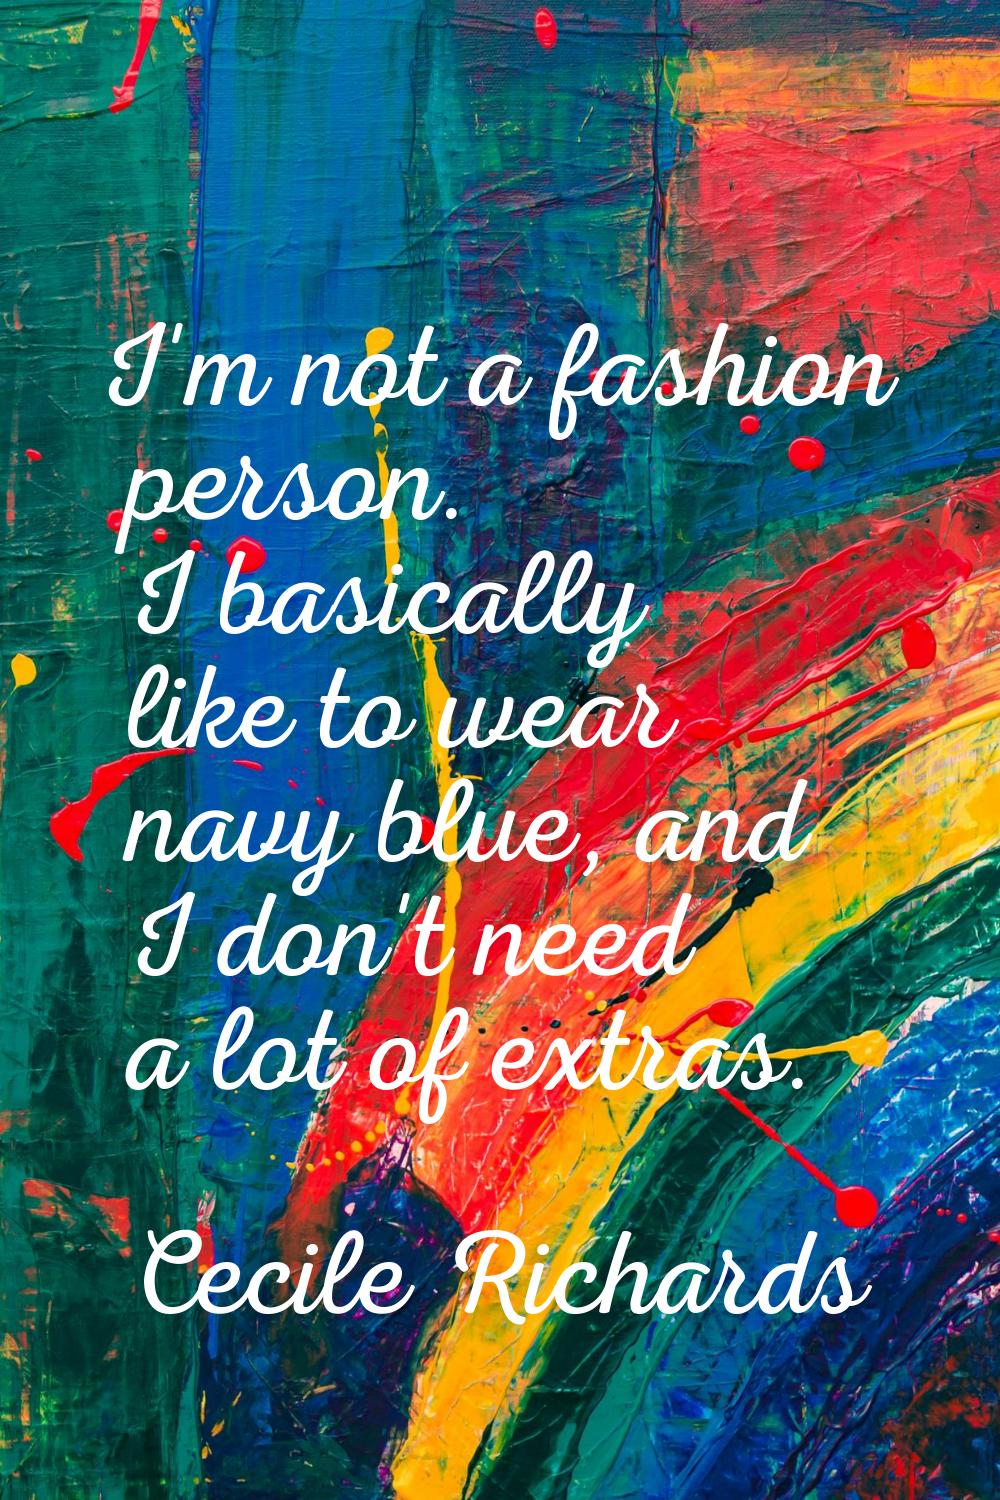 I'm not a fashion person. I basically like to wear navy blue, and I don't need a lot of extras.